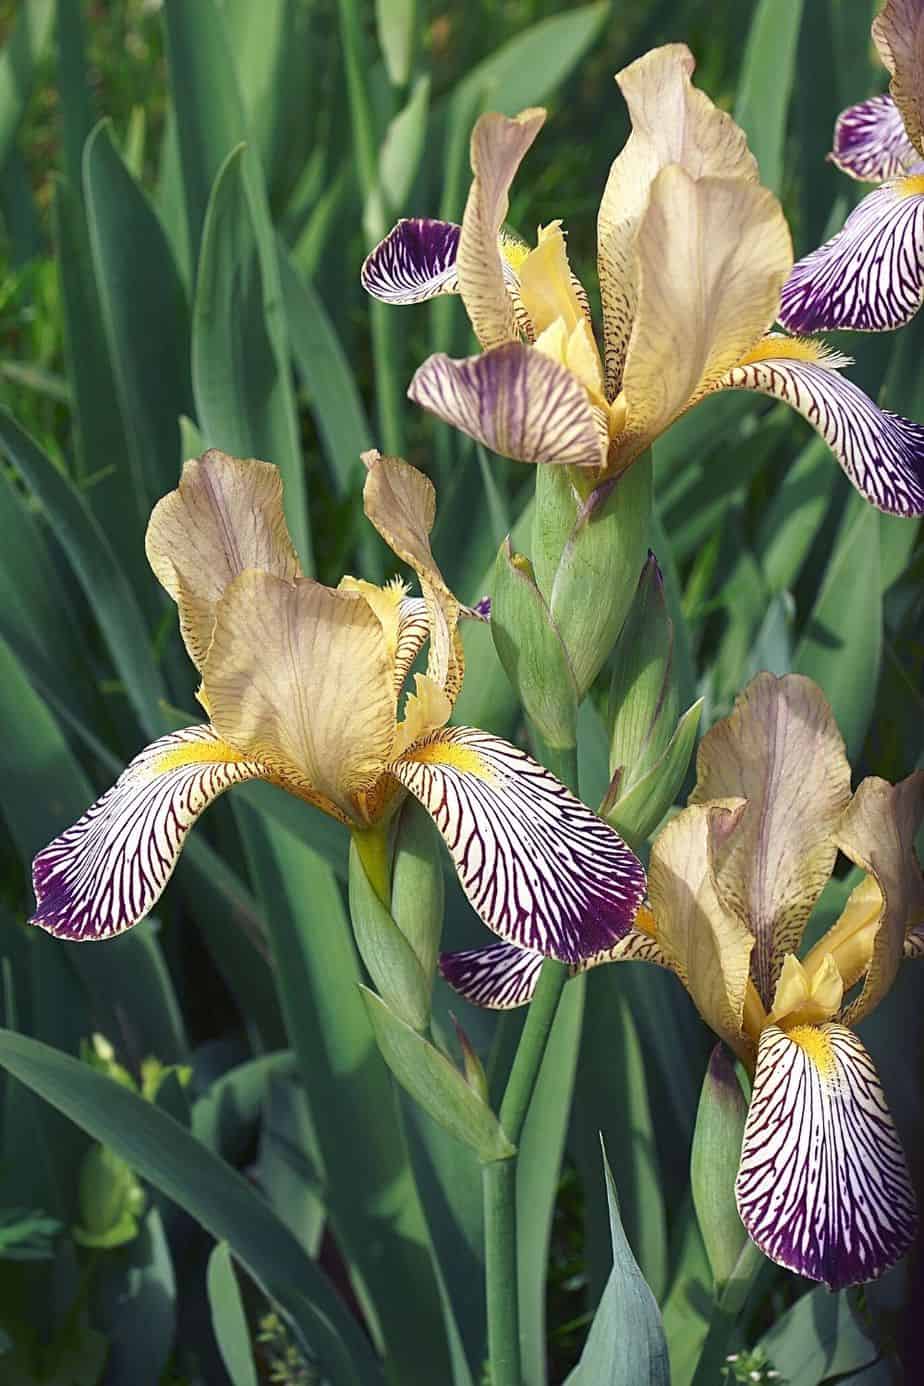 Variegated Sweet Iris is a shade-tolerant plant. hence, can thrive in the east-facing side of the house